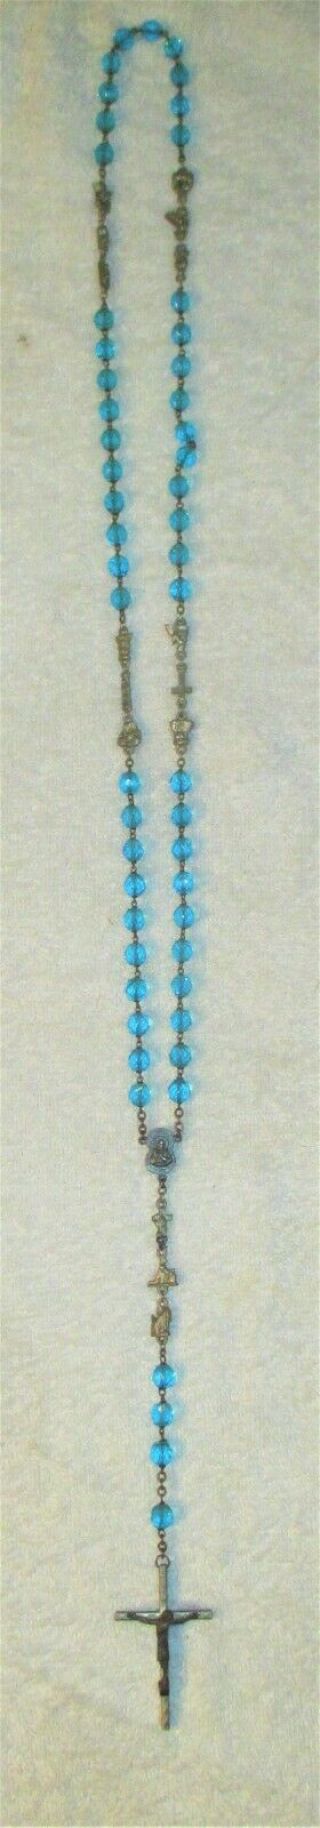 Vtg 26 " Aqua Blue Glass Rosary Beads W Station Of The Cross Made In Italy